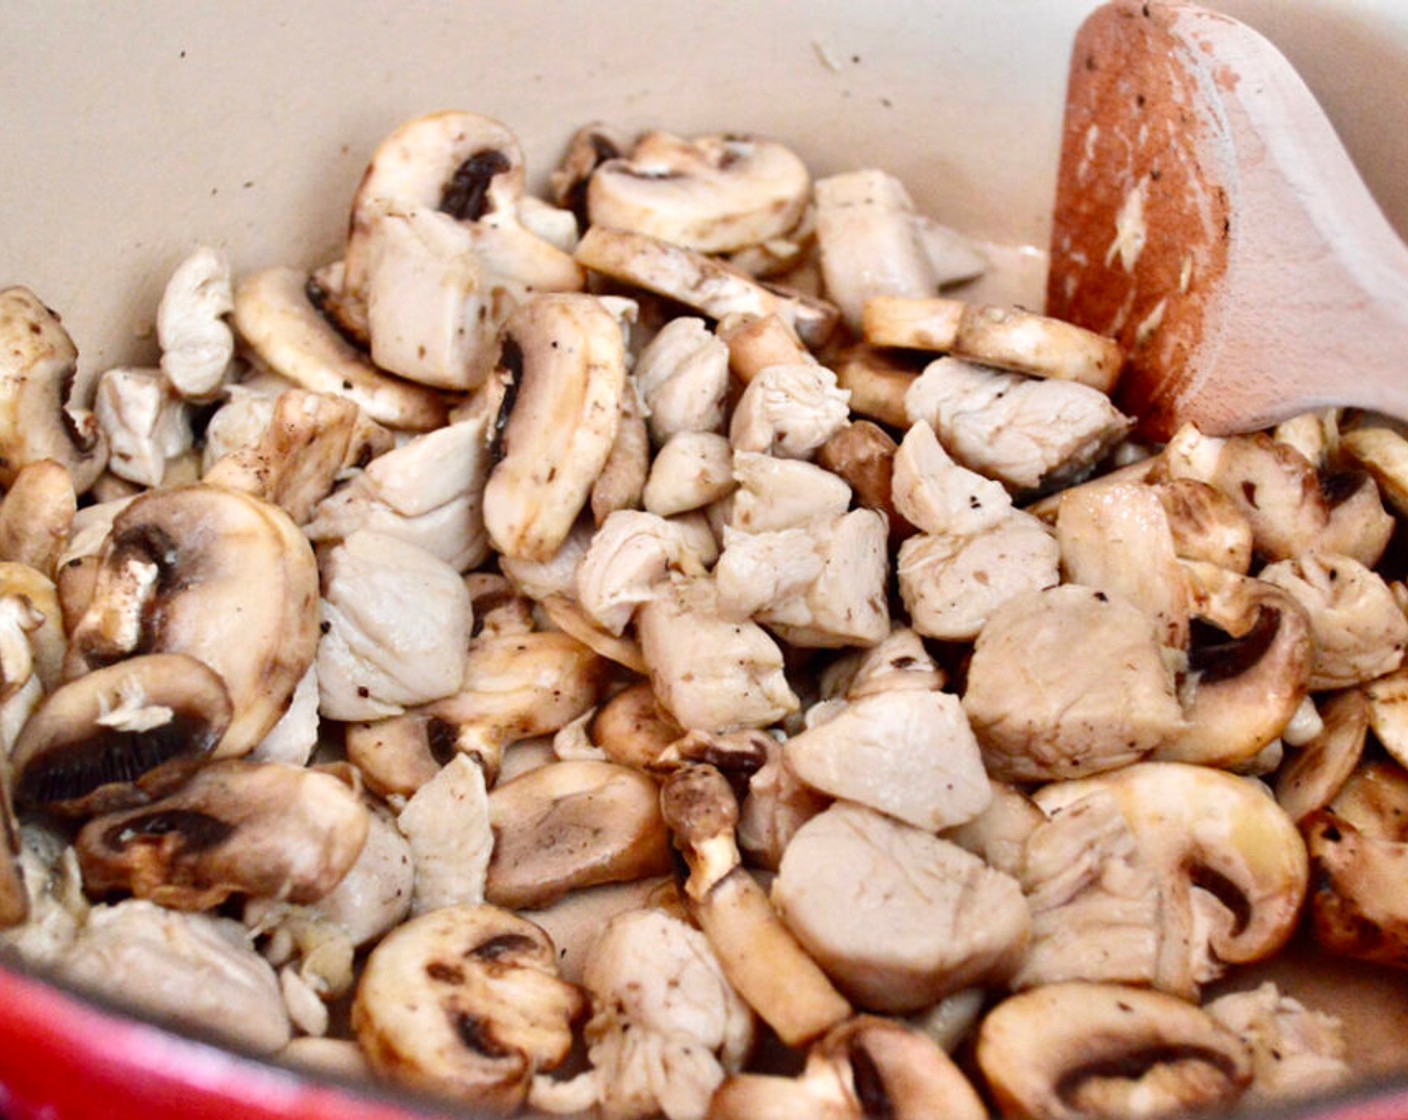 step 2 Add White Mushrooms (2 1/3 cups) and let them get soft and tender while stirring with the chicken. Season generously Salt (to taste) and Ground Black Pepper (to taste).